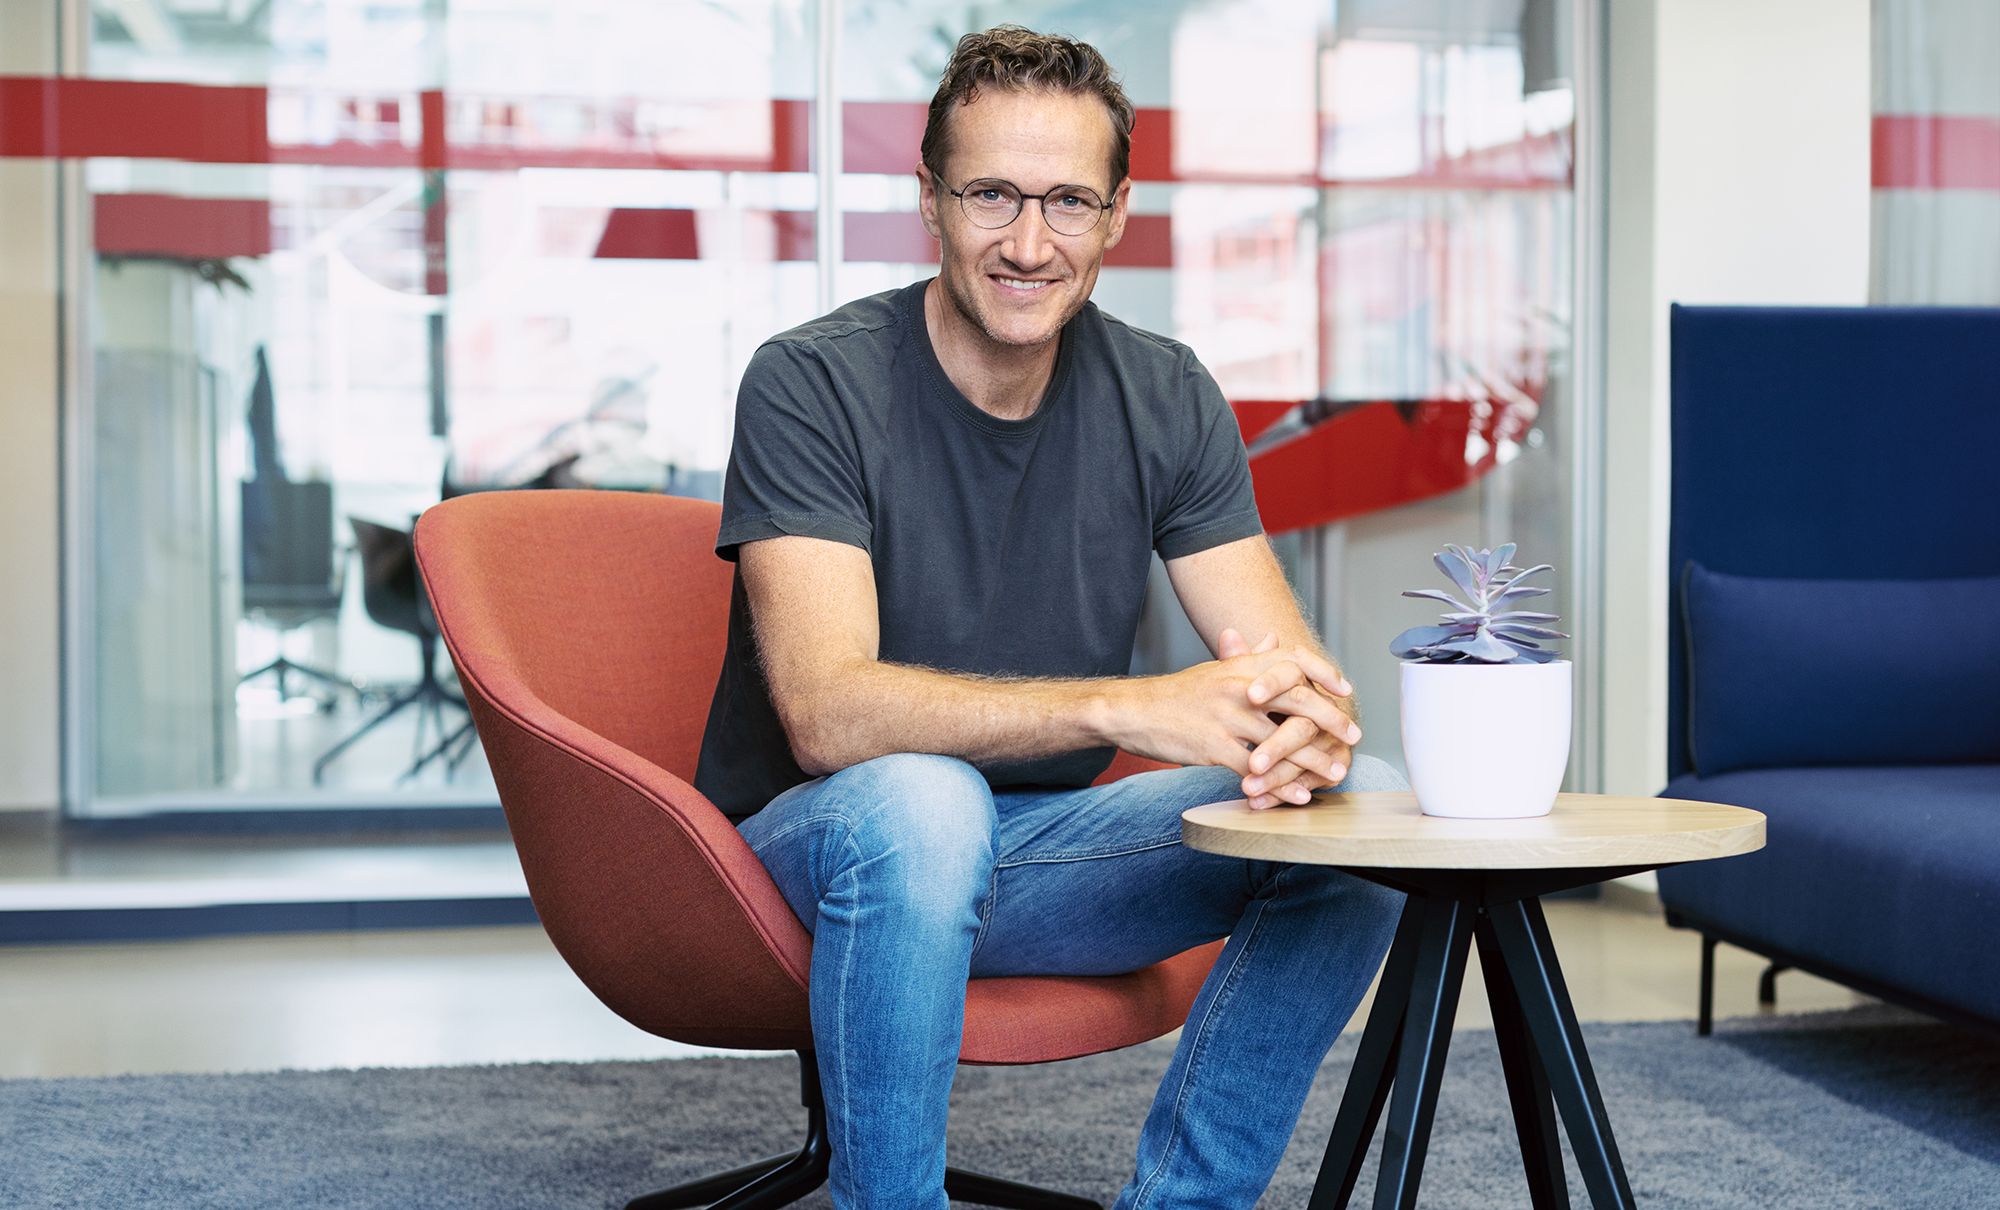 A Founder’s Story: Niklas Östberg, CEO at Delivery Hero